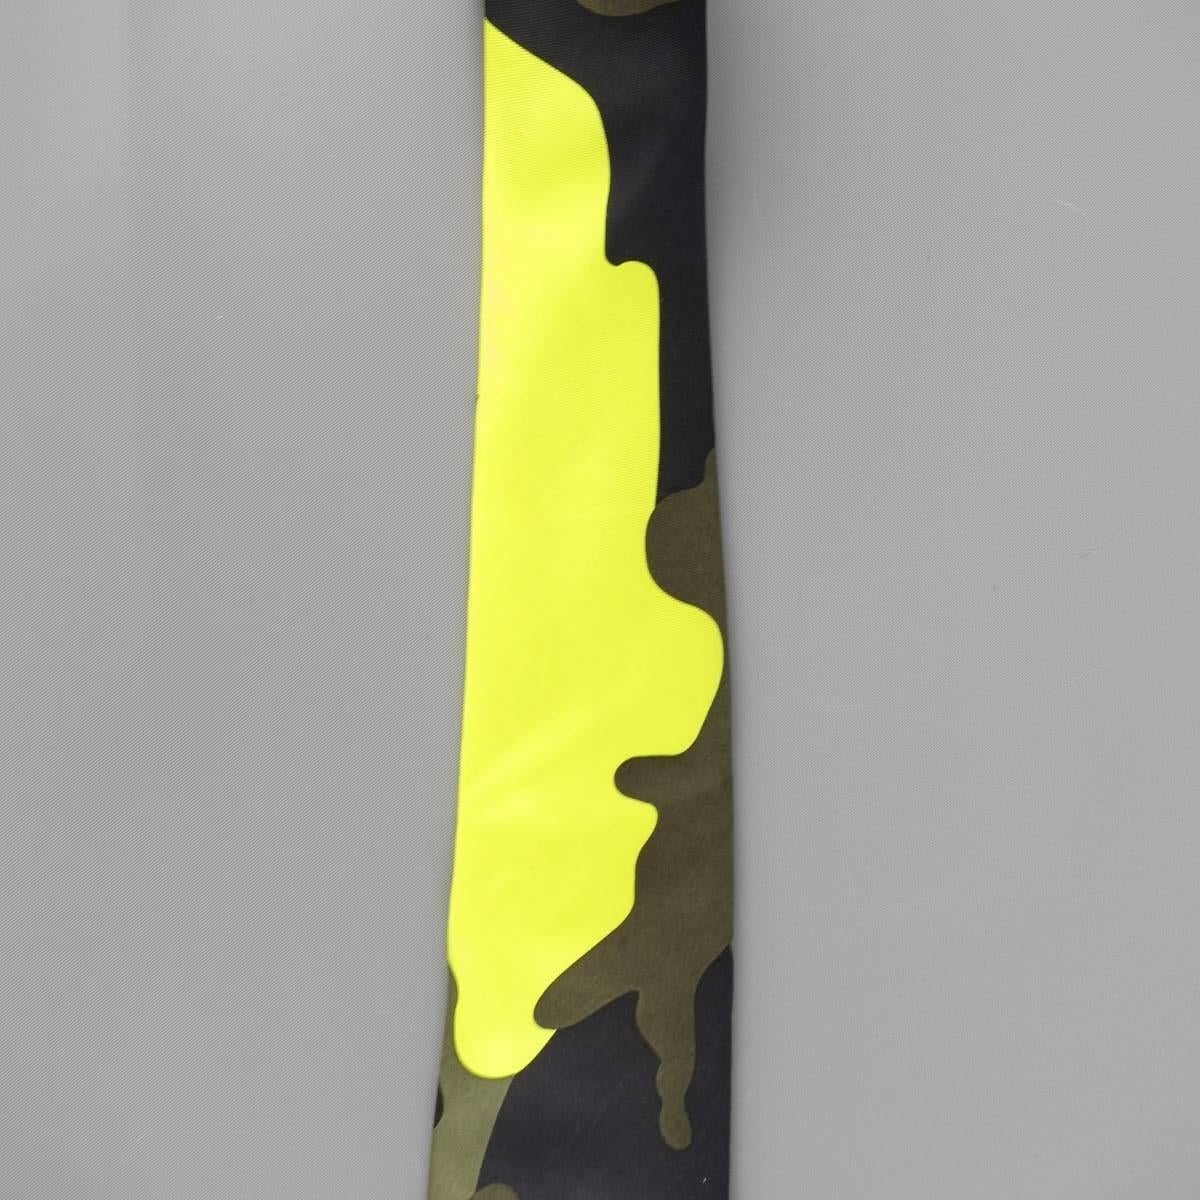 VALENTINO dress tie comes in large scale camouflage print with hues of olive, black and neon green. Made in Italy.
 
Excellent Pre-Owned Condition.
 
Width: 3.25 in.

SKU: 83861